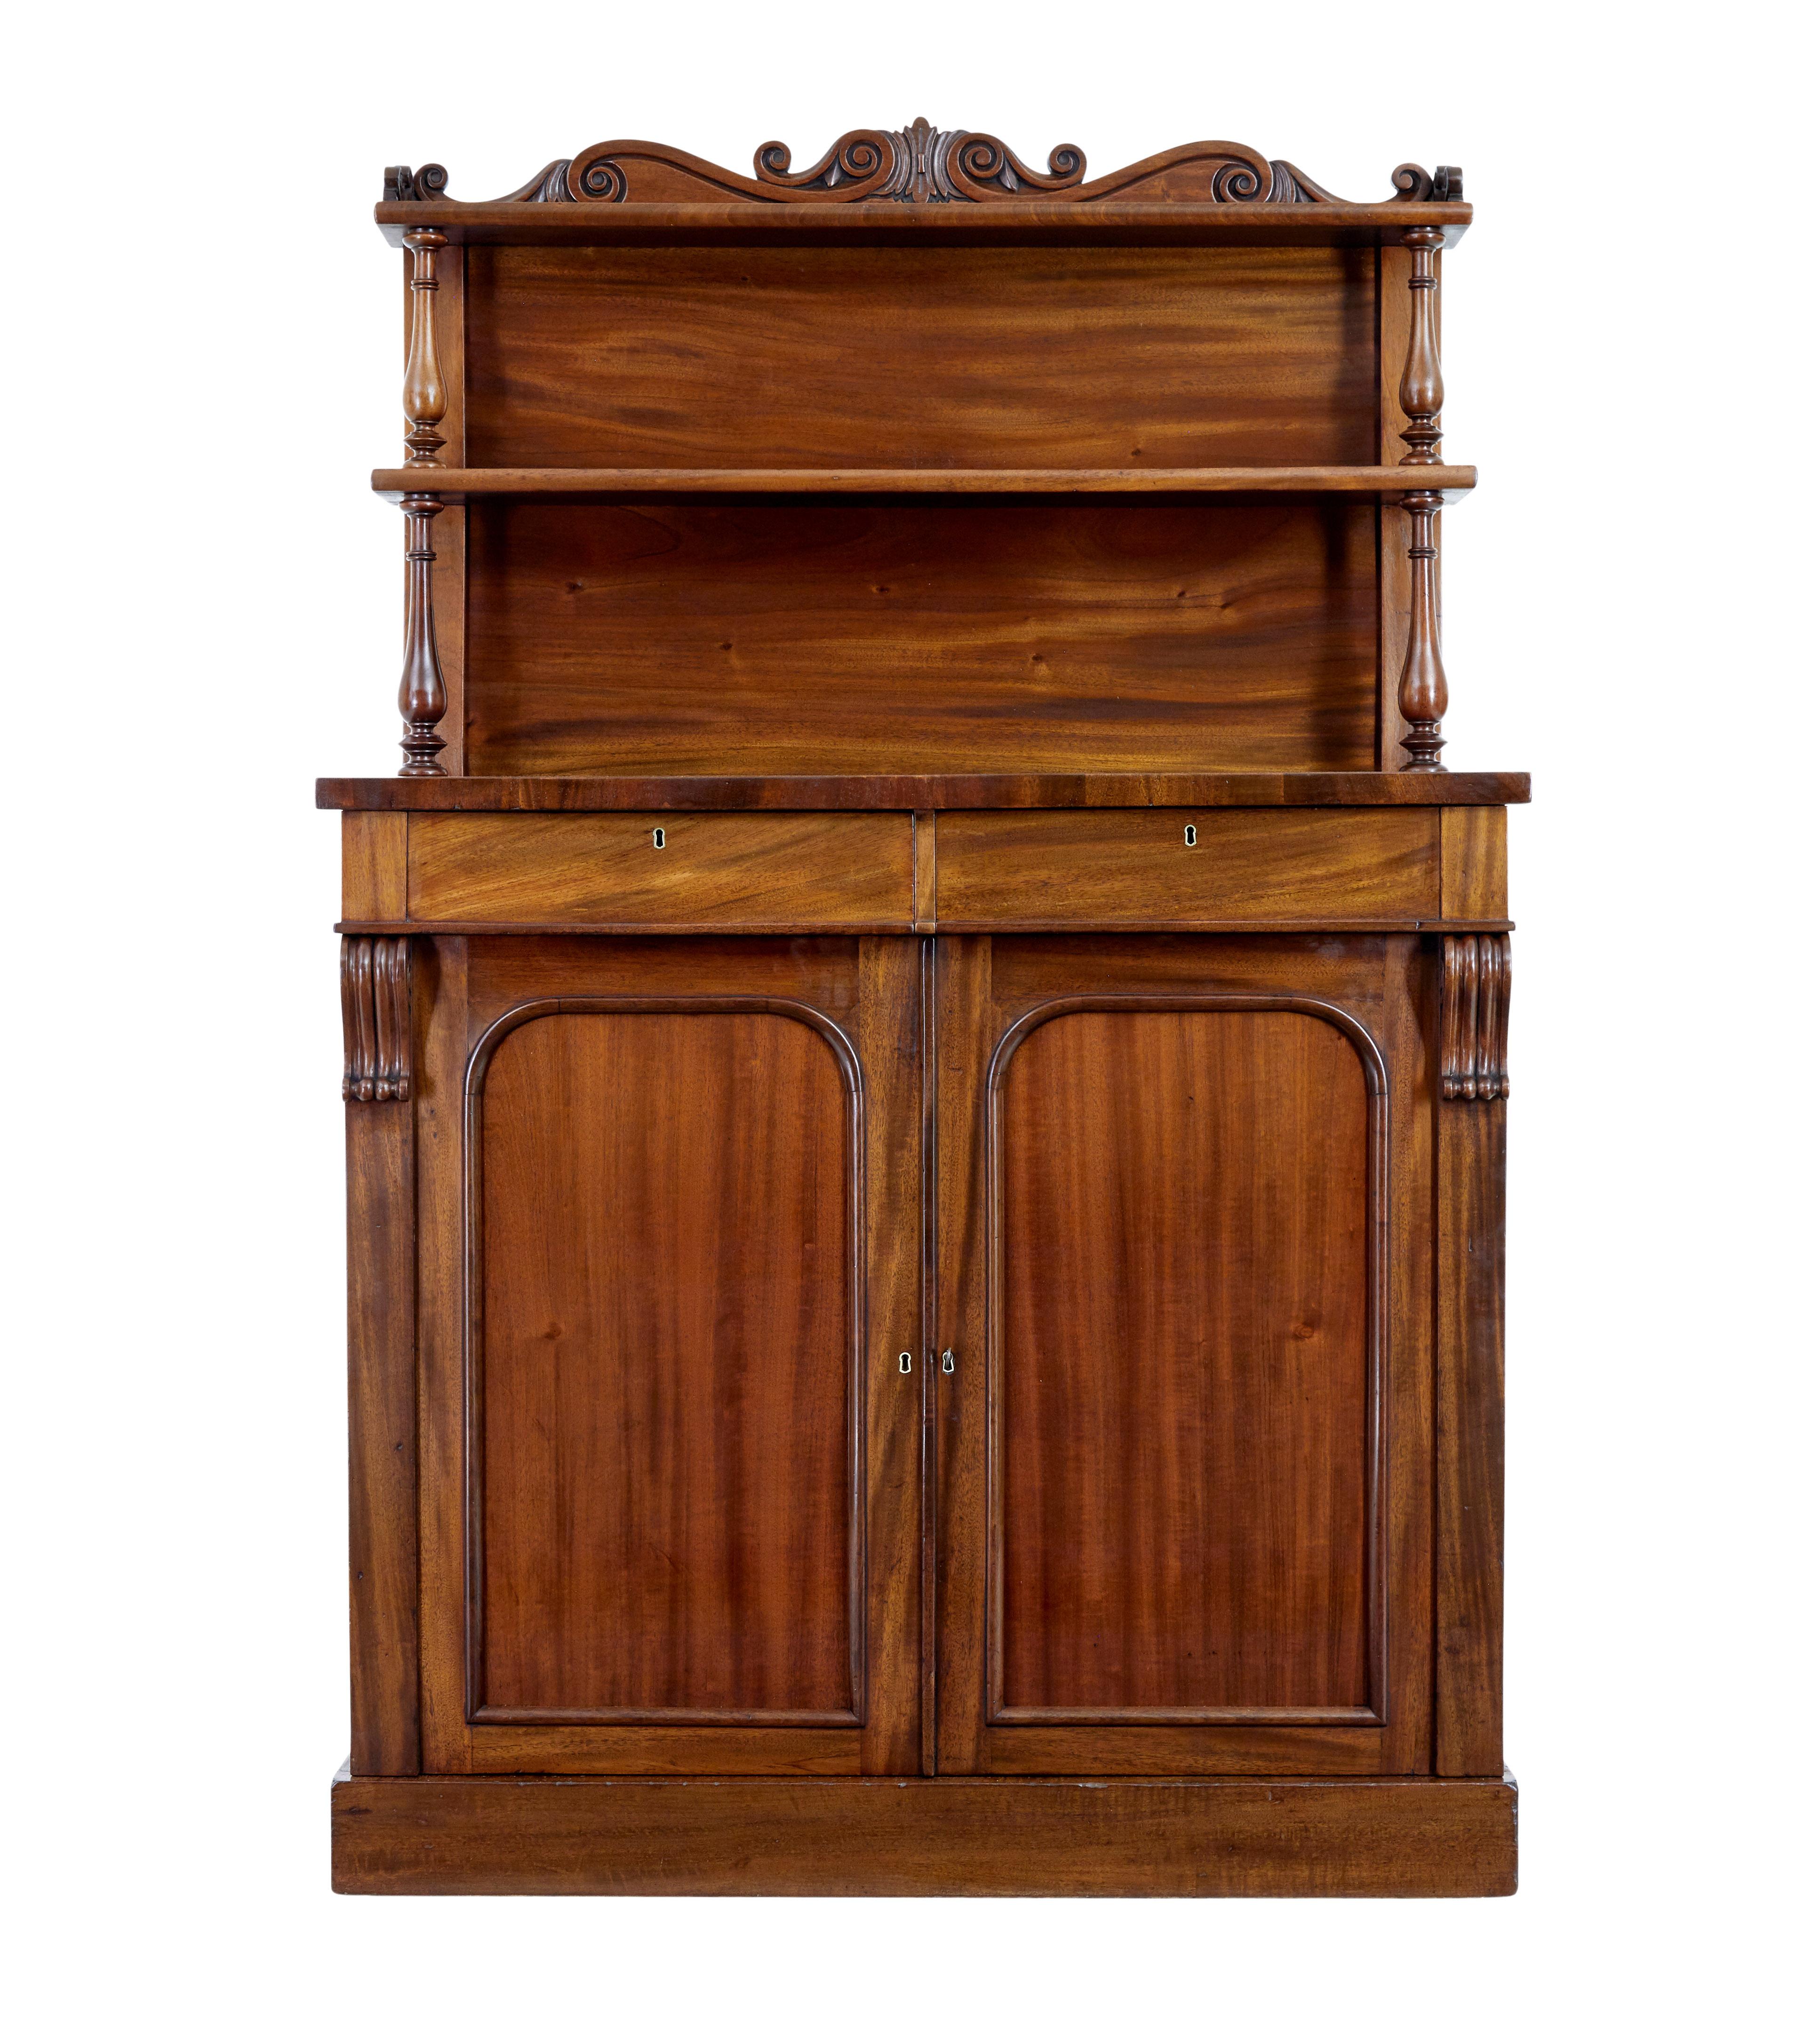 19th century french mahogany chiffonier sideboard, circa 1870.

Good quality sideboard made in rich mahogany. Top section with carved scroll gallery and 2 shelves supported by turned supports. 2 drawers below the top surface, which is veneered in a